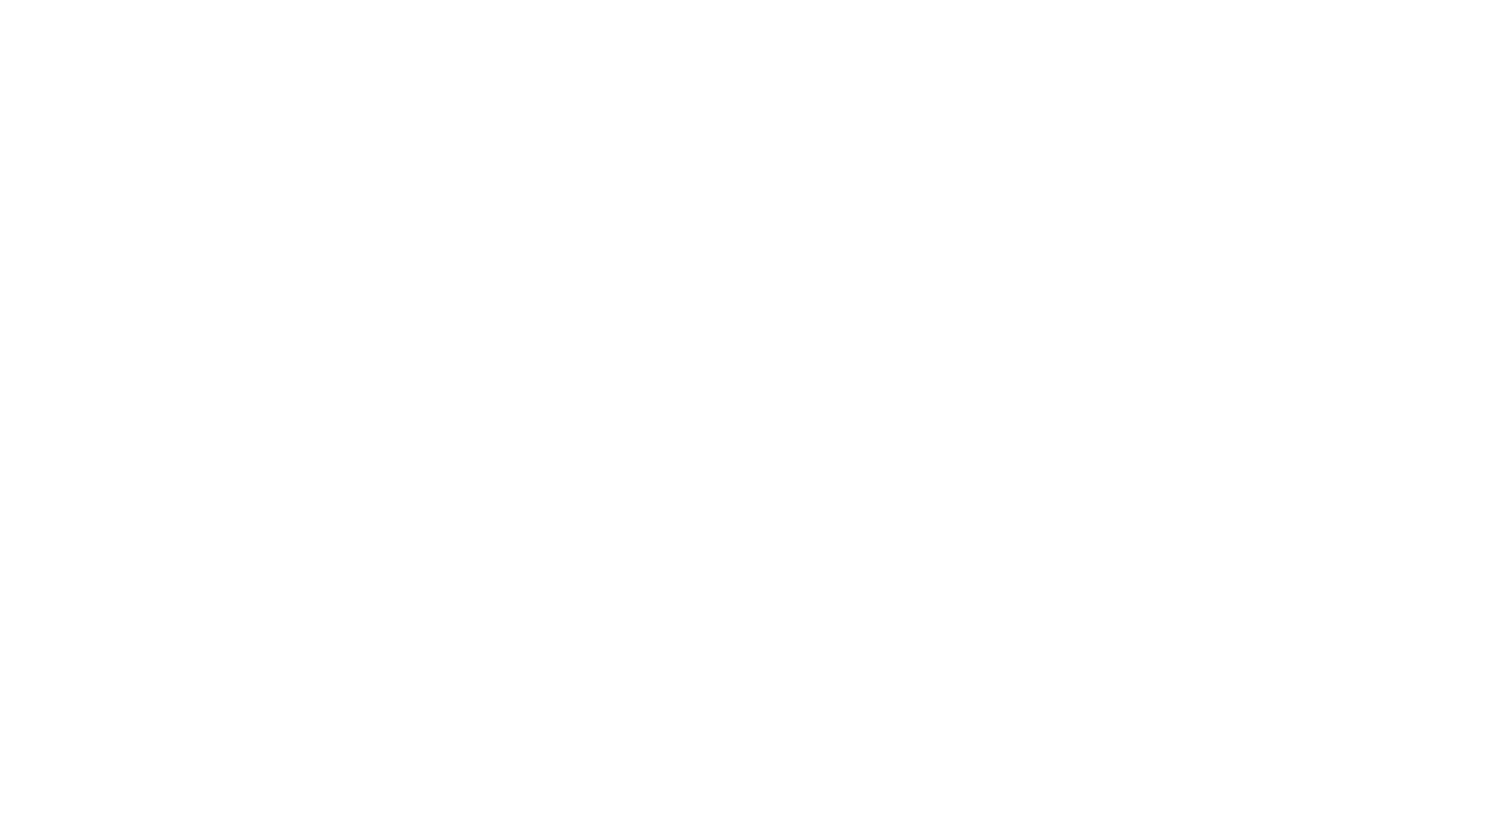 The Gongoliers